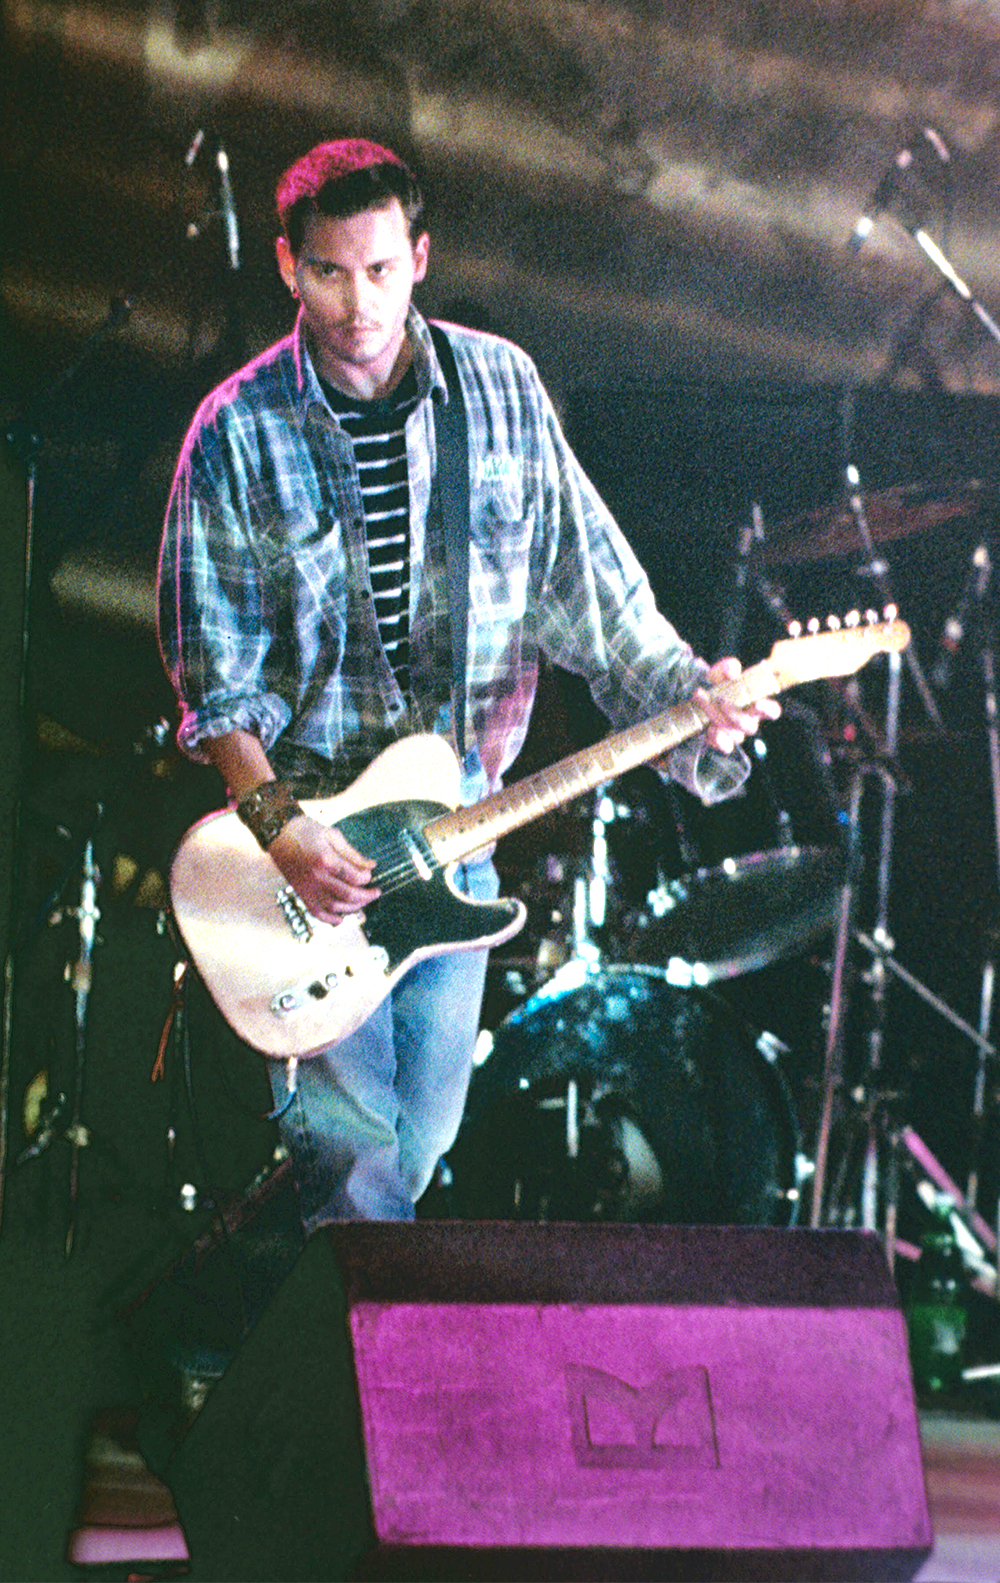 <p>Johnny Depp has never shied away from his love of performing music. In 2021, he is part of the Hollywood Vampires, a band featuring Alice Cooper and Joe Perry of Aerosmith. Here, a 34-year-old Johnny plays to a crowd in Vienna, Austria in 1997.</p>